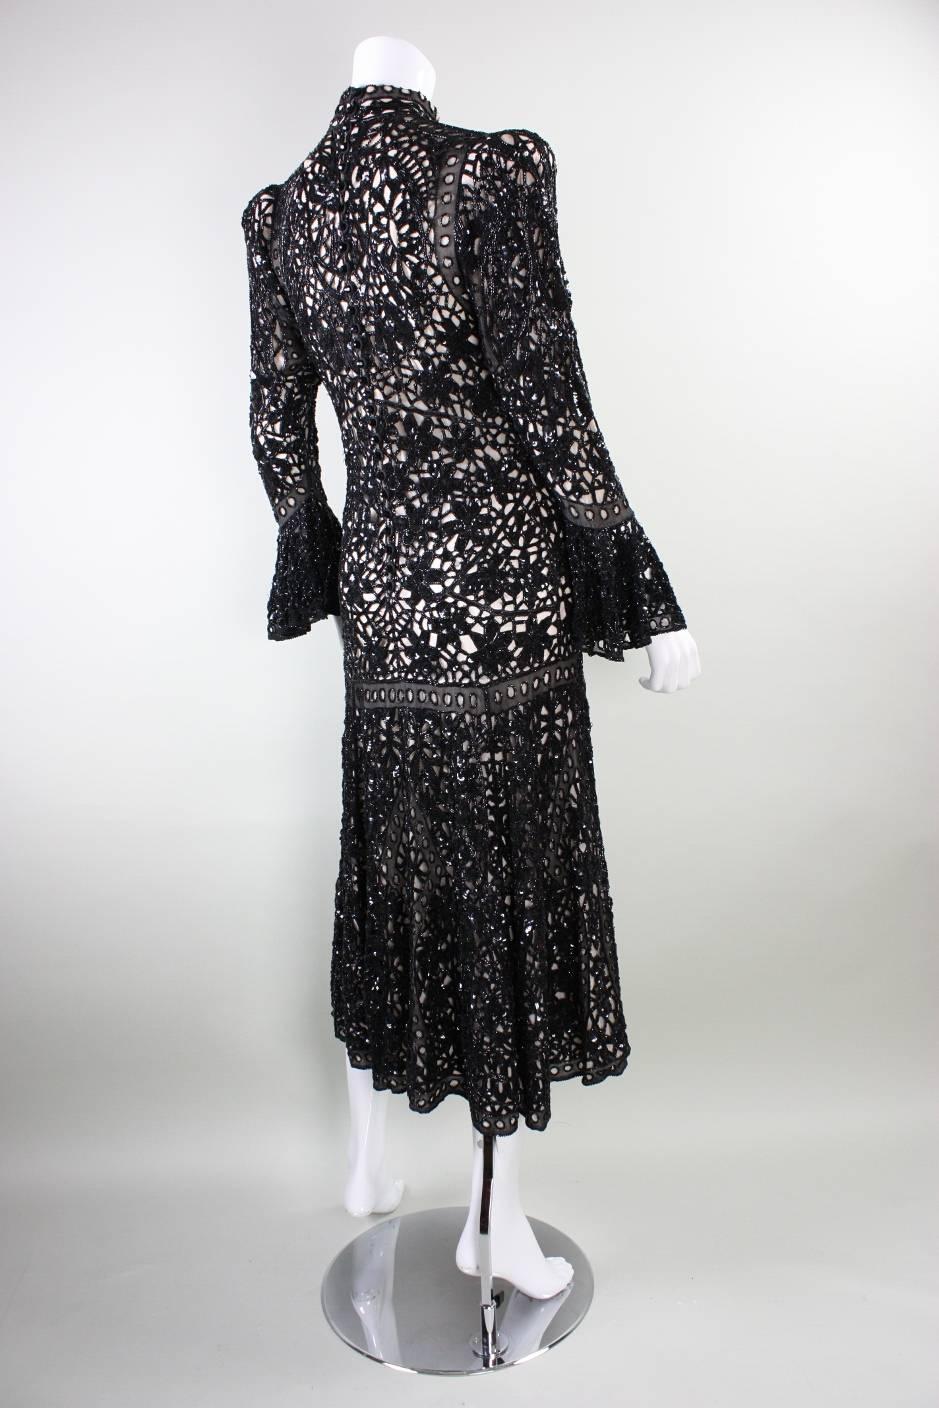 Eavis and Brown Beaded Lace Evening Dress In Good Condition For Sale In Los Angeles, CA